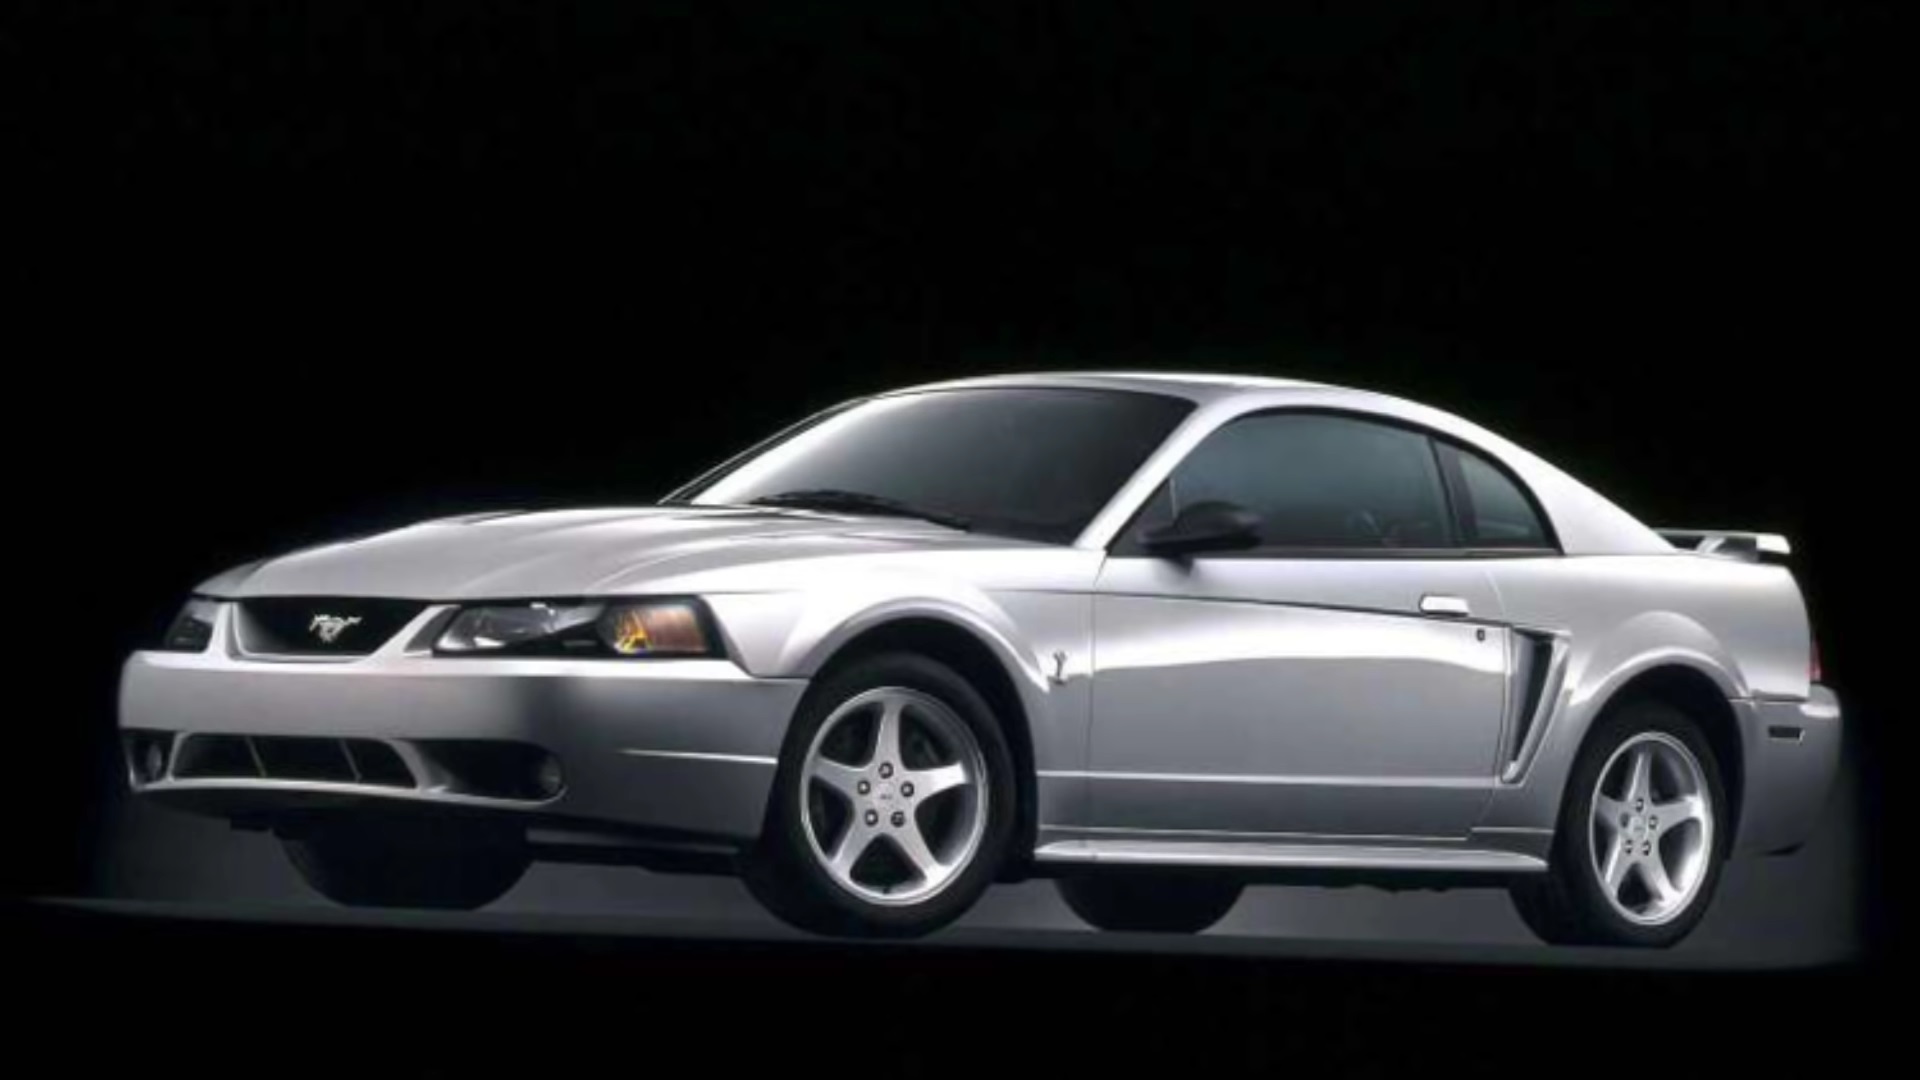 Video: 2001 Ford Mustang SVT Cobra Specs + Review